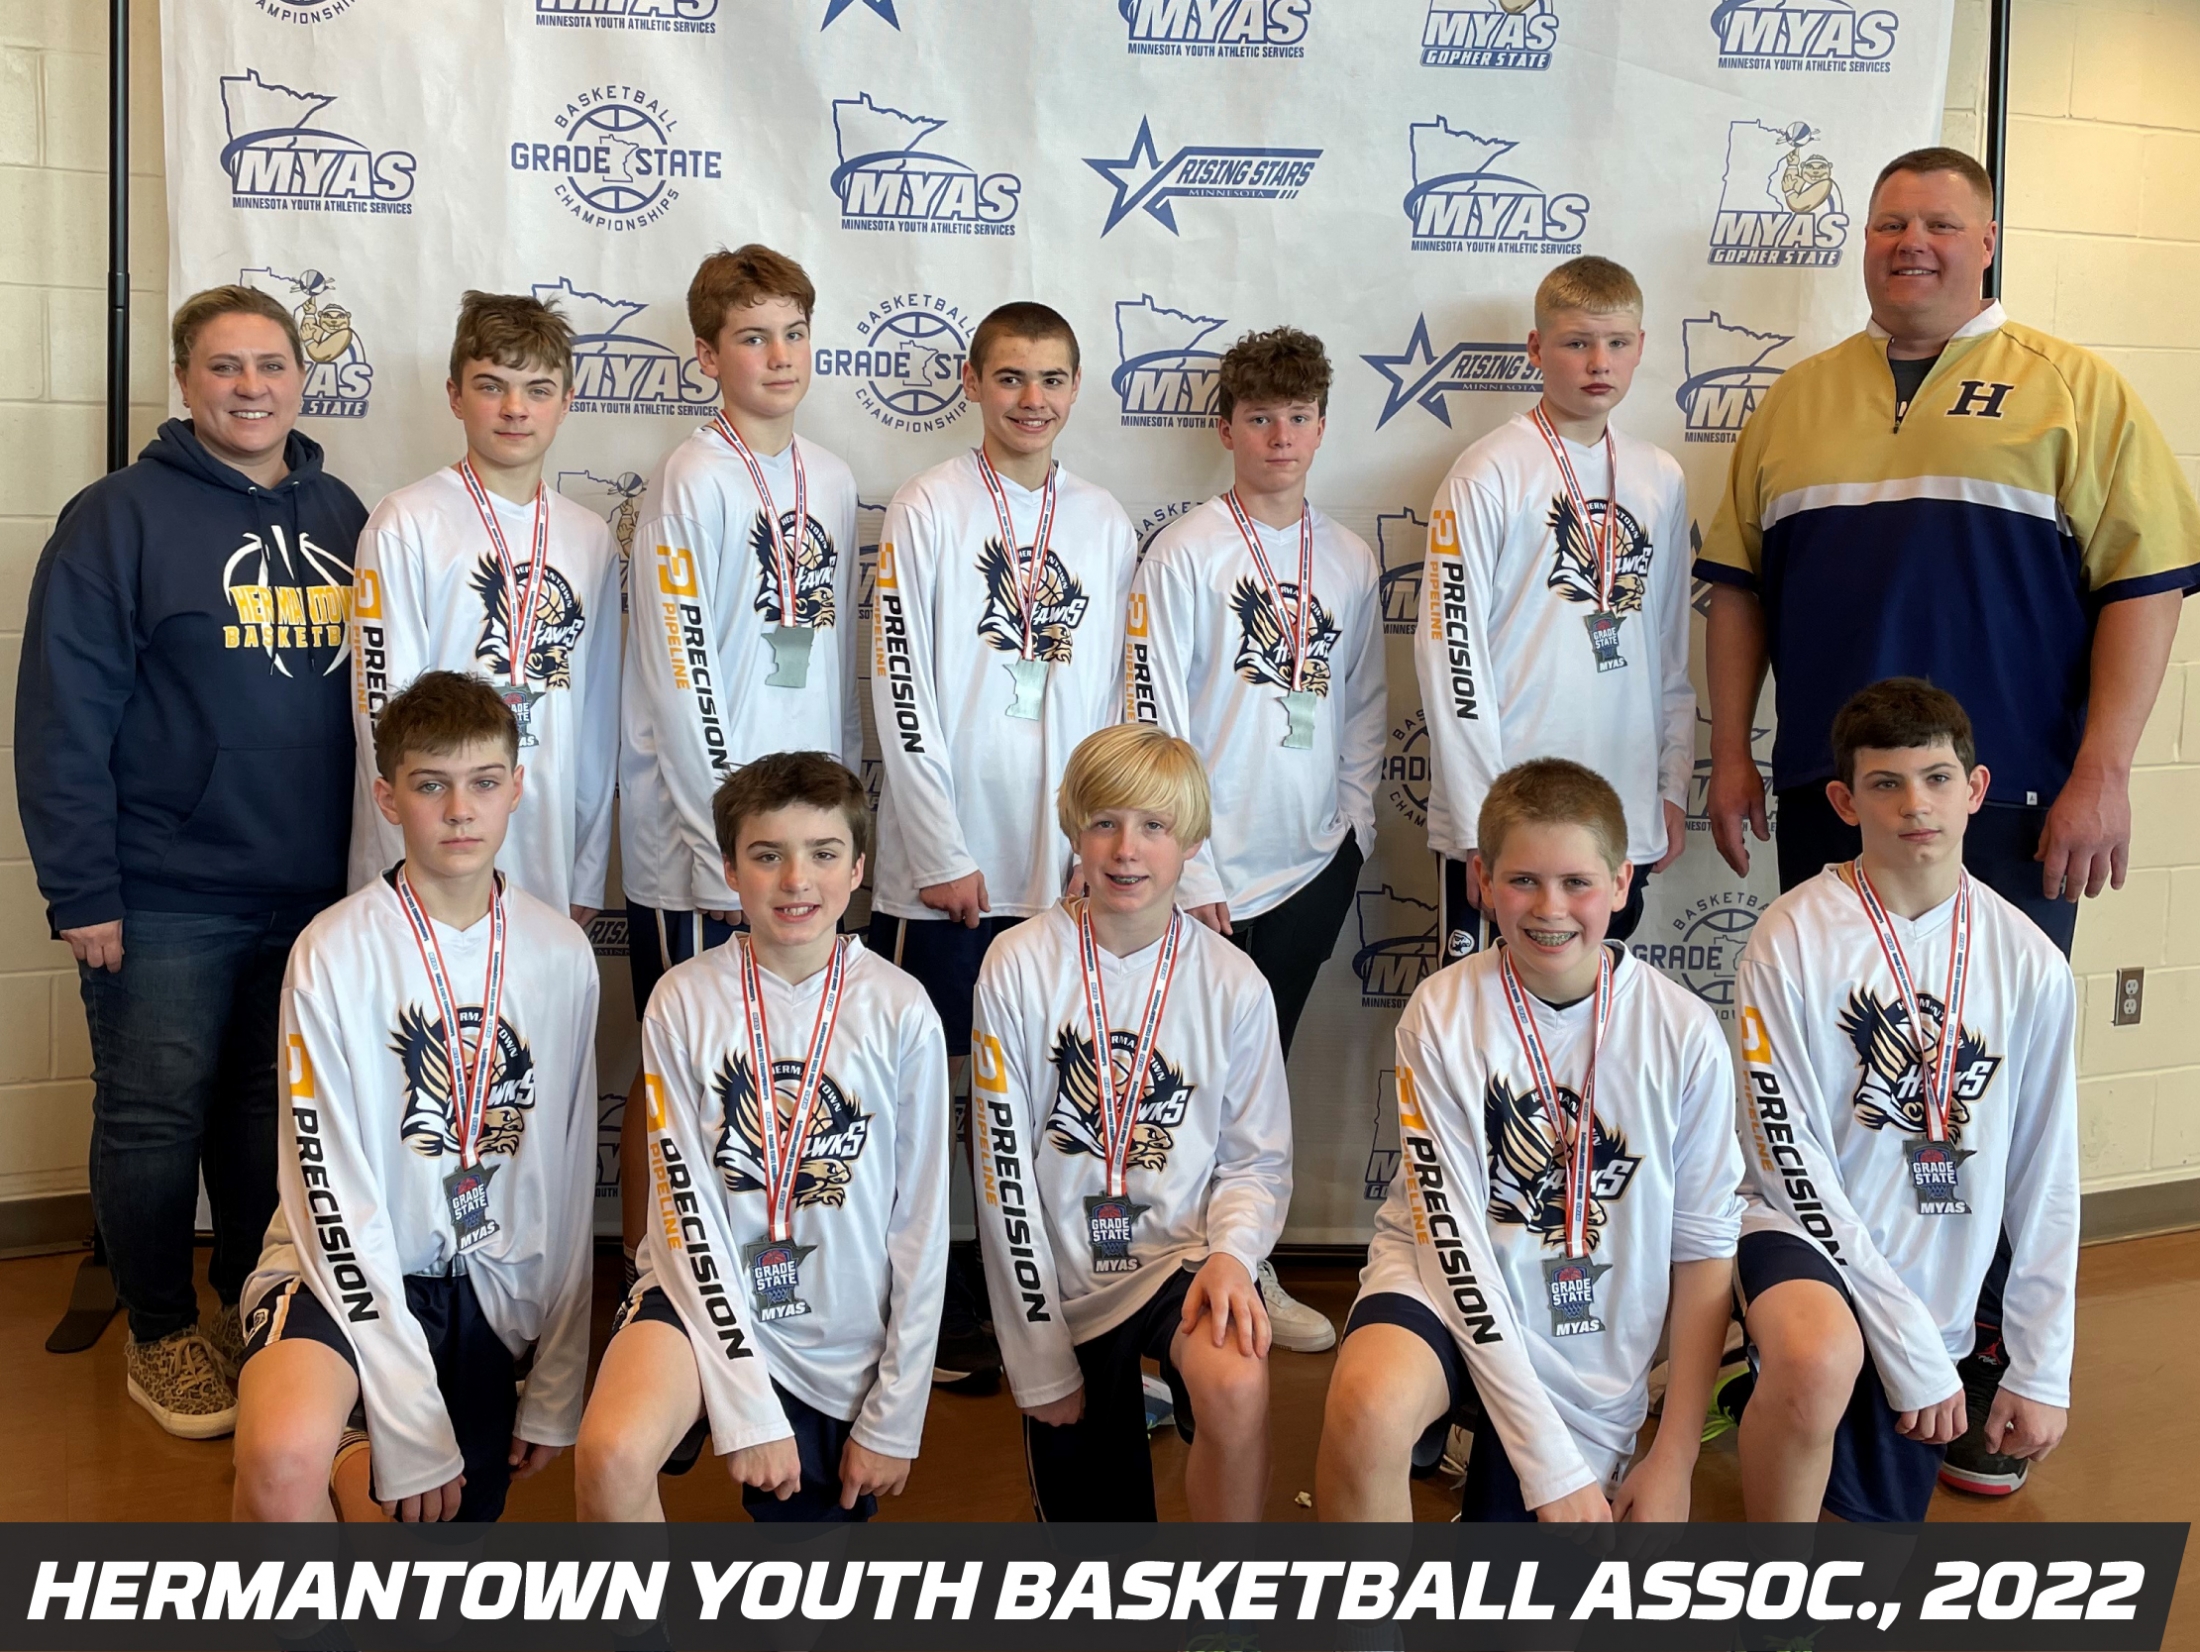 Precision Pipeline Community Involvement: Hermantown Youth Basketball Association 2022